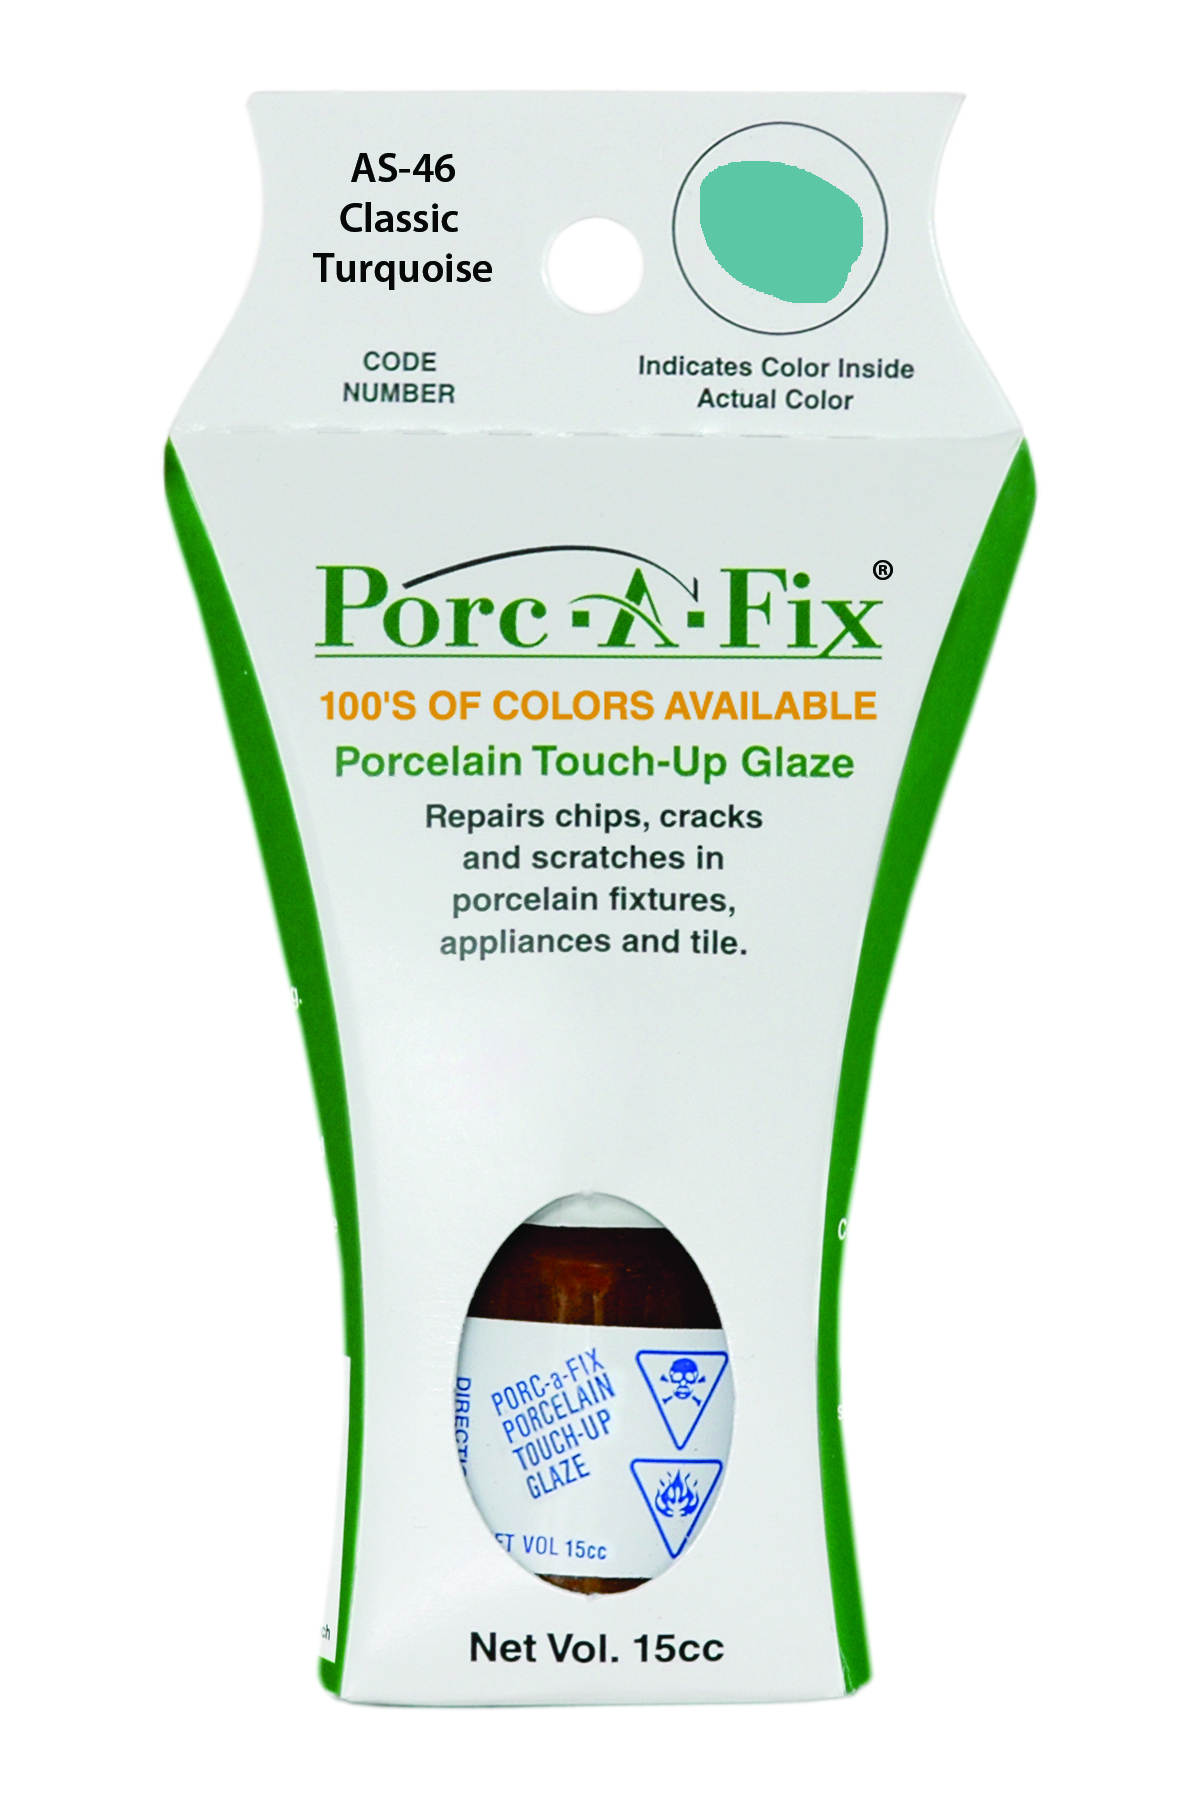 Fixture-Fix | AS-46 | Porc-A-Fix Touch-Up Glaze American Standard Classic Turquoise - Compatible with American Standard 070900-1930A Touch Up Paint Kit - CLASSIC TURQUOISE